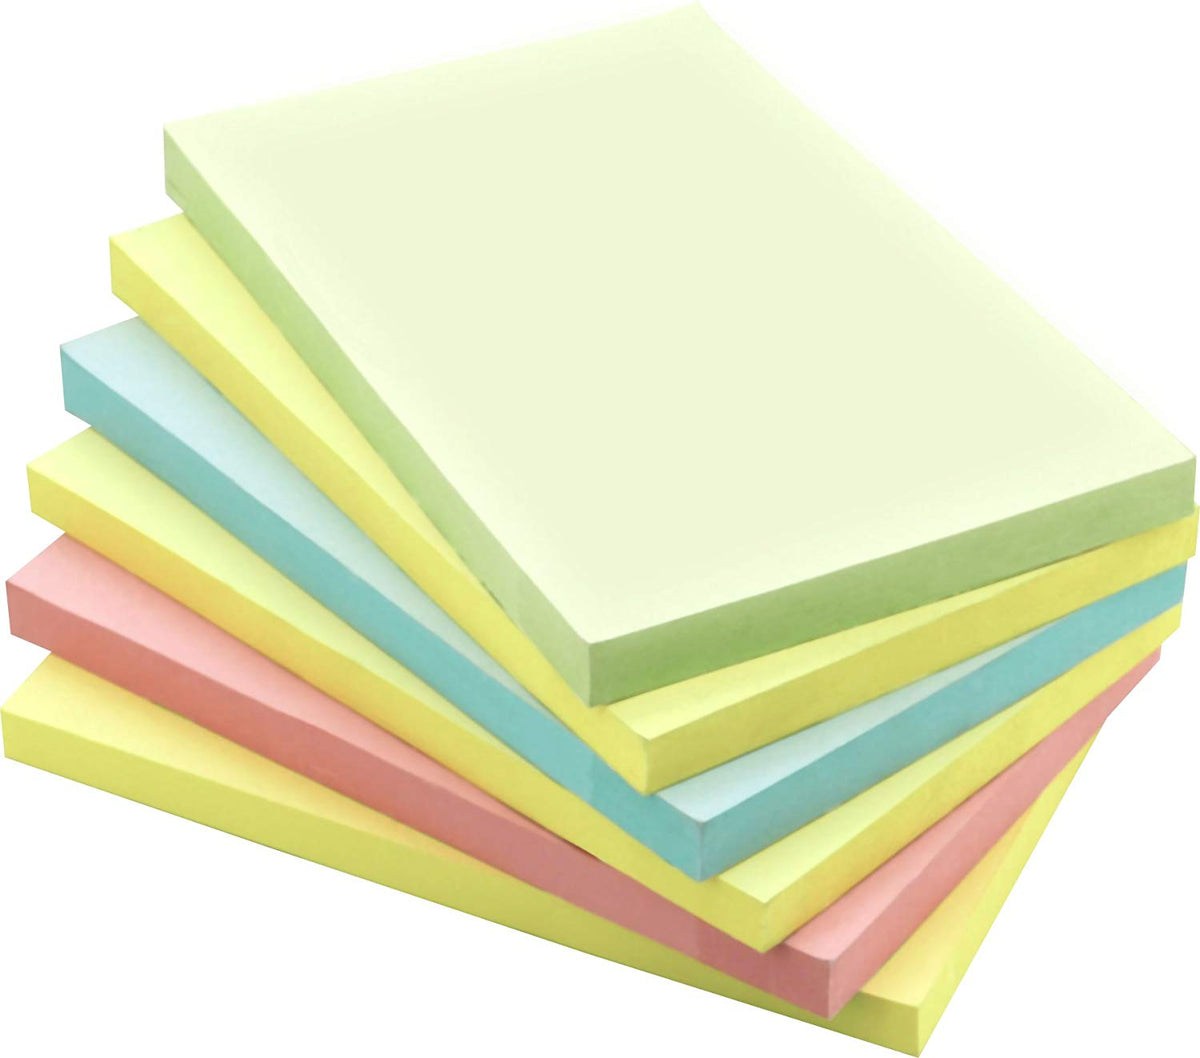 4A Sticky Big Pad,15 x 15 in,Large Size,Neon Yellow,Orange,Red and Green,Self-Stick Notes,30 Sheets/Pad,4 Pads/Pack,4A BP 1515-Nx4